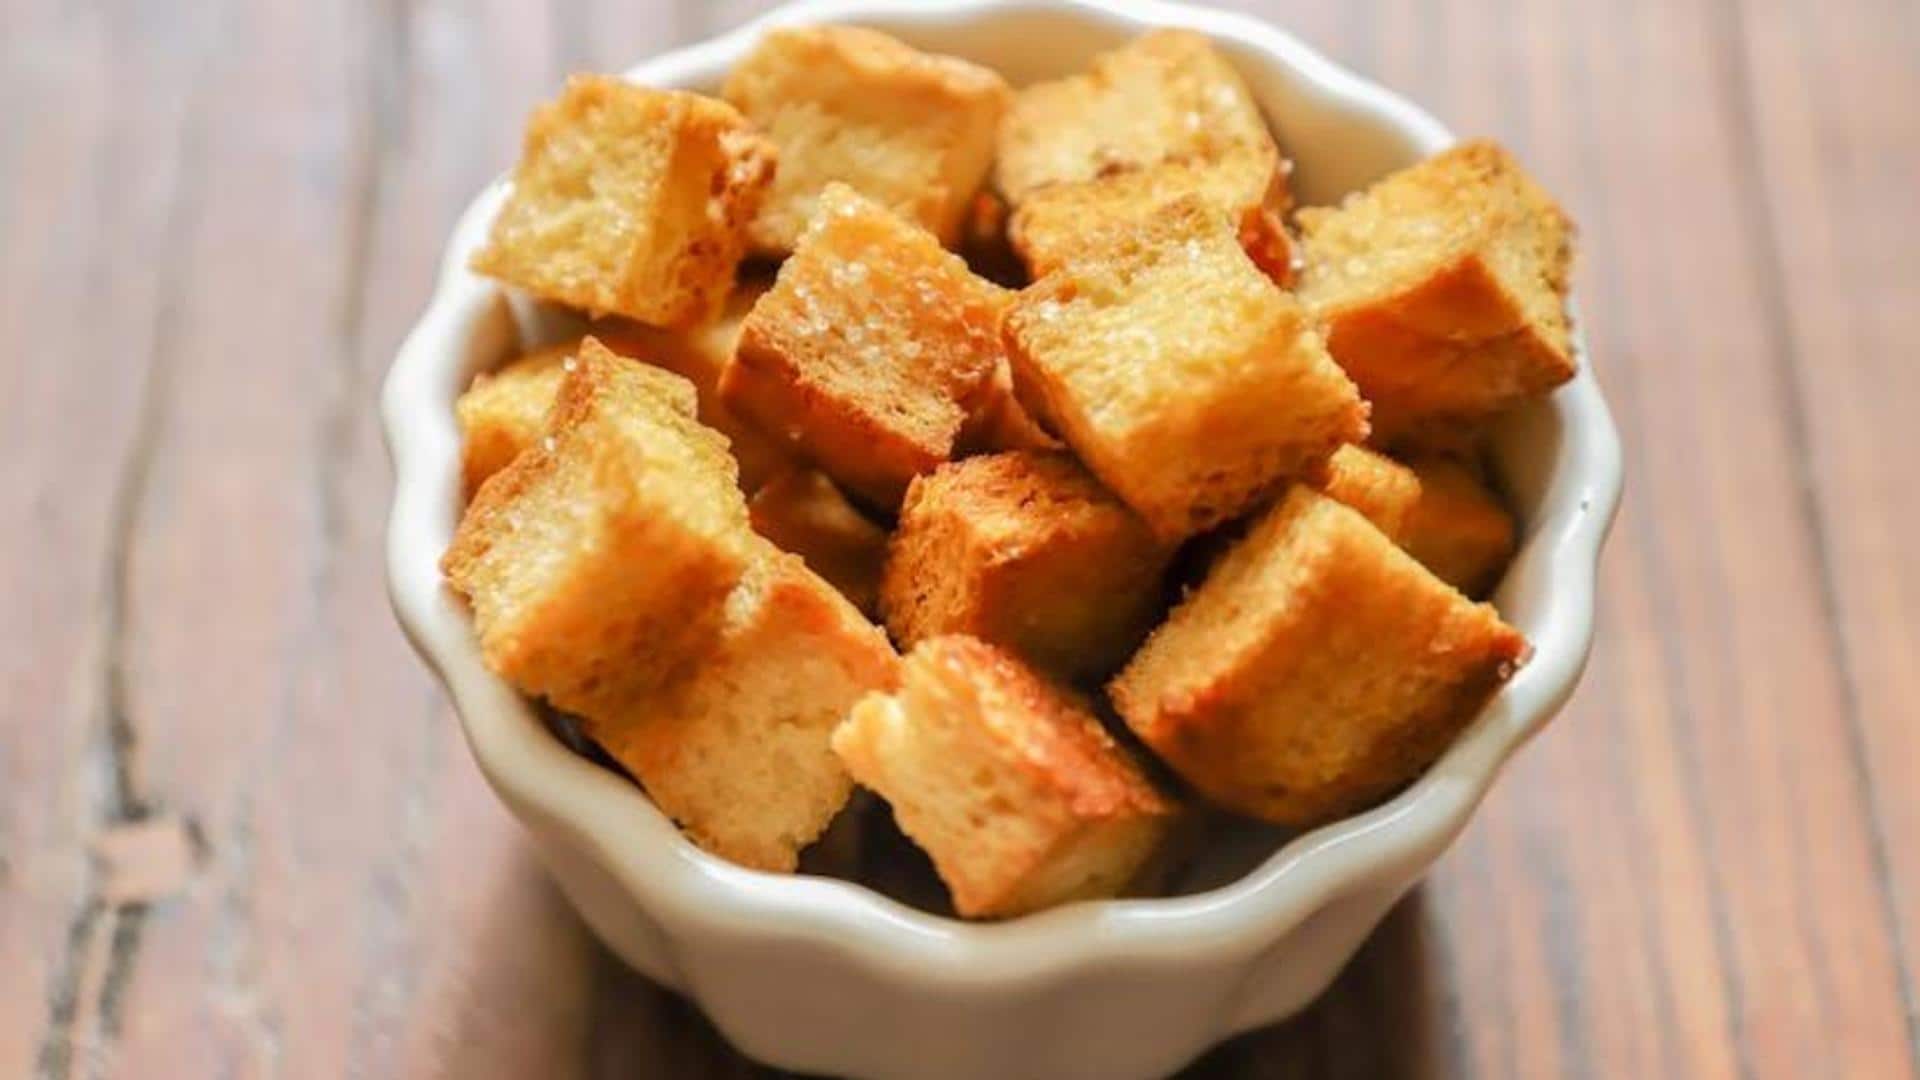 National Crouton Day: 5 non-salad ways to celebrate this occasion